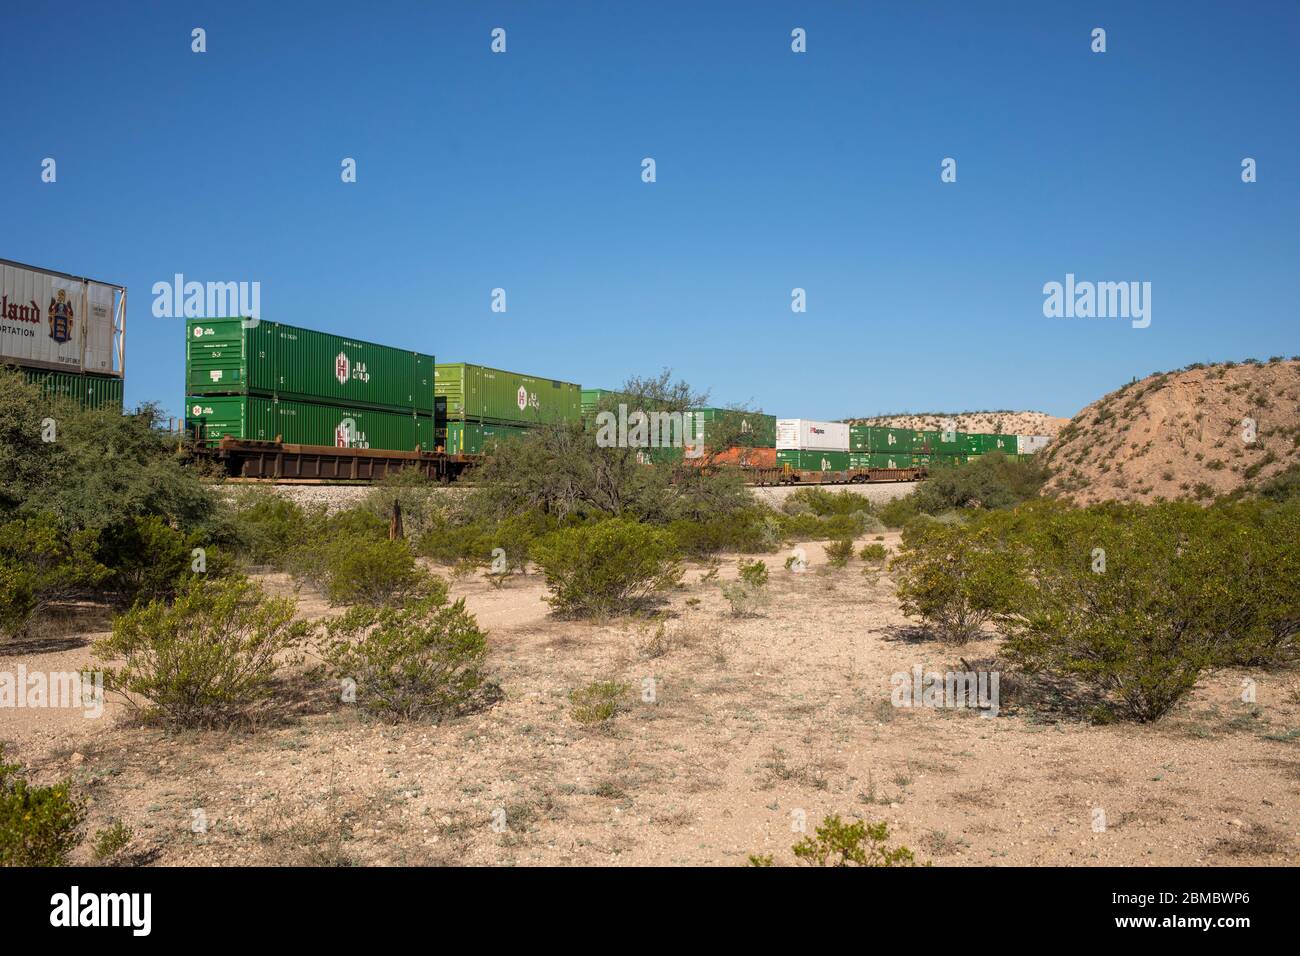 A train of container cars rolls through a desert landscape left frame Stock Photo